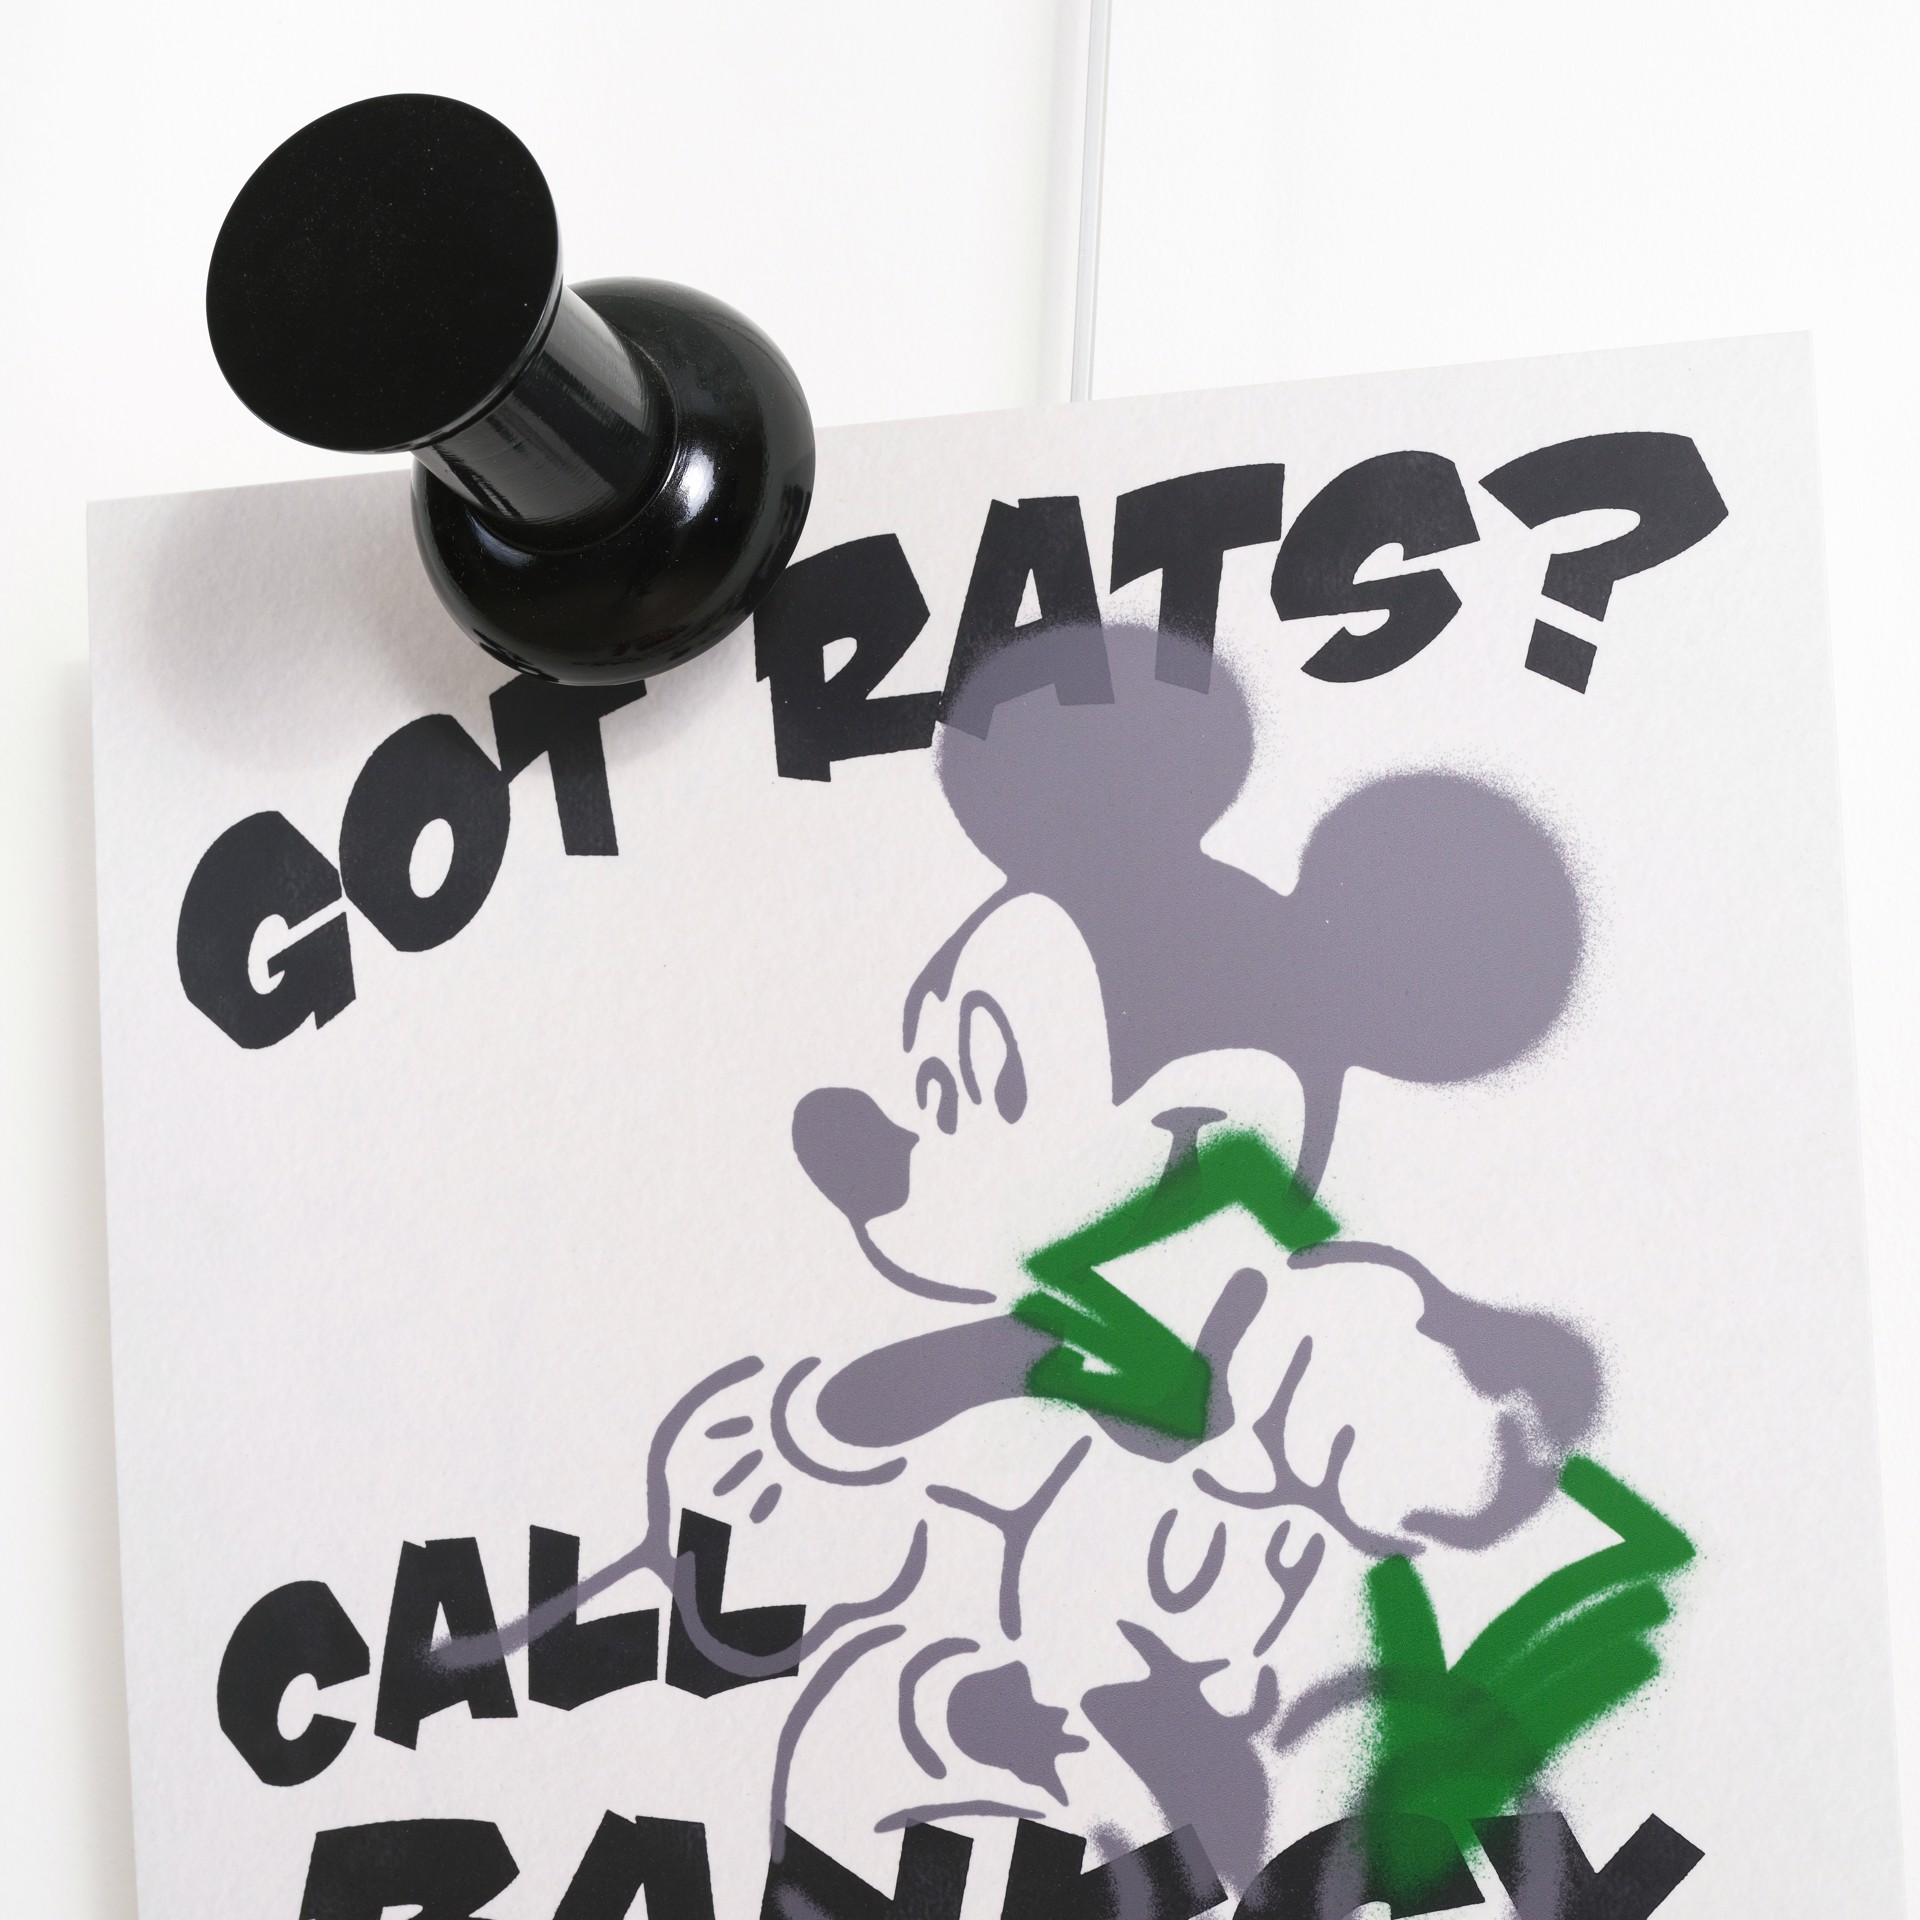 Go Rats ? by Miles Jaffe